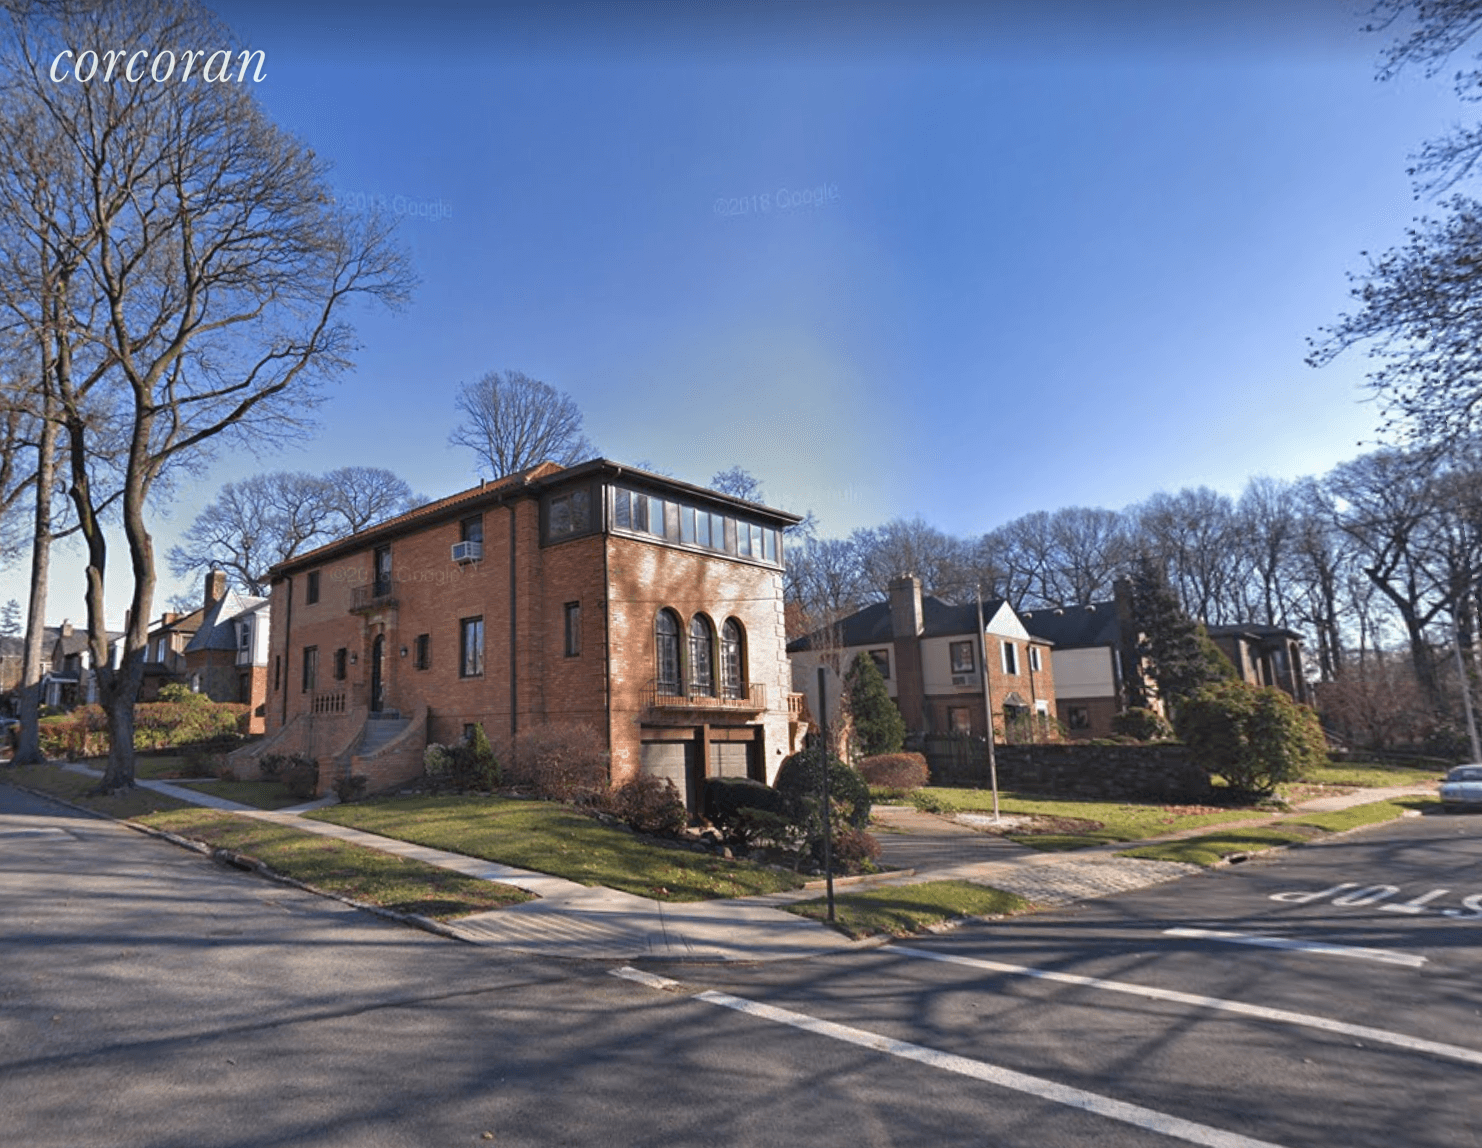 Welcome to this wonderful and spacious multi family home in the prime Jamaica Estates neighborhood.